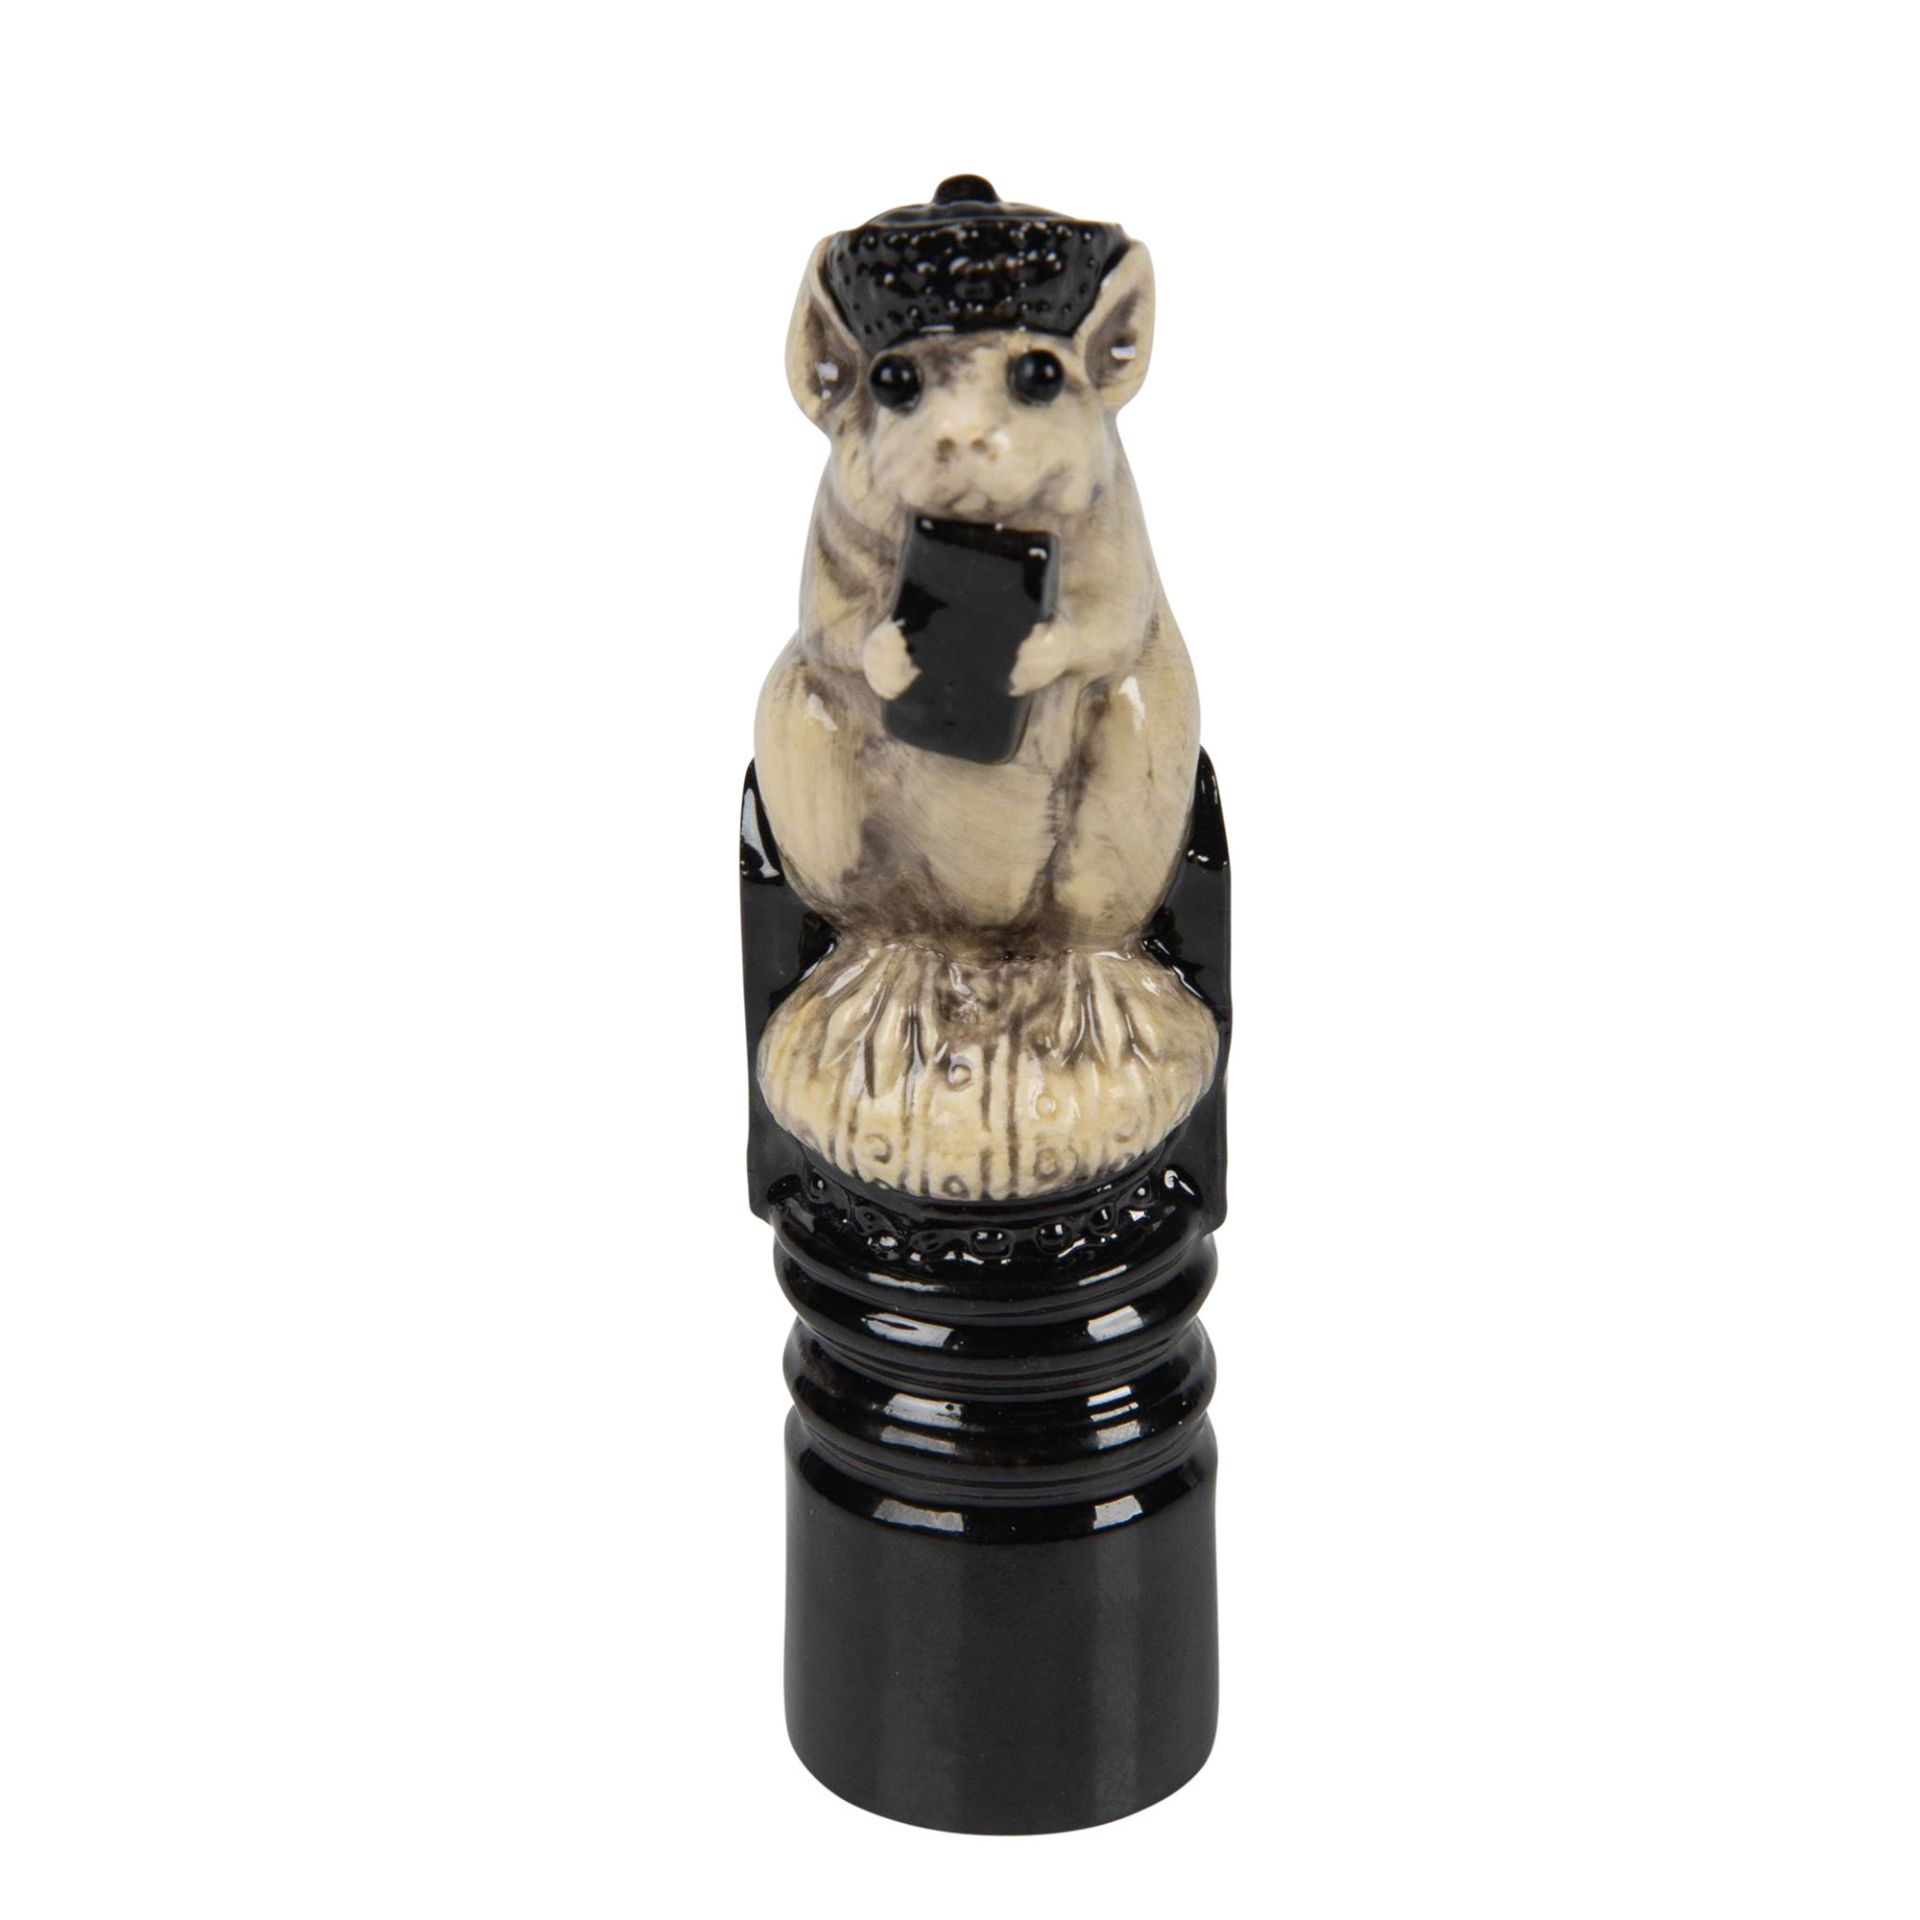 Doulton Lambeth George Tinworth Chess Piece, Queen